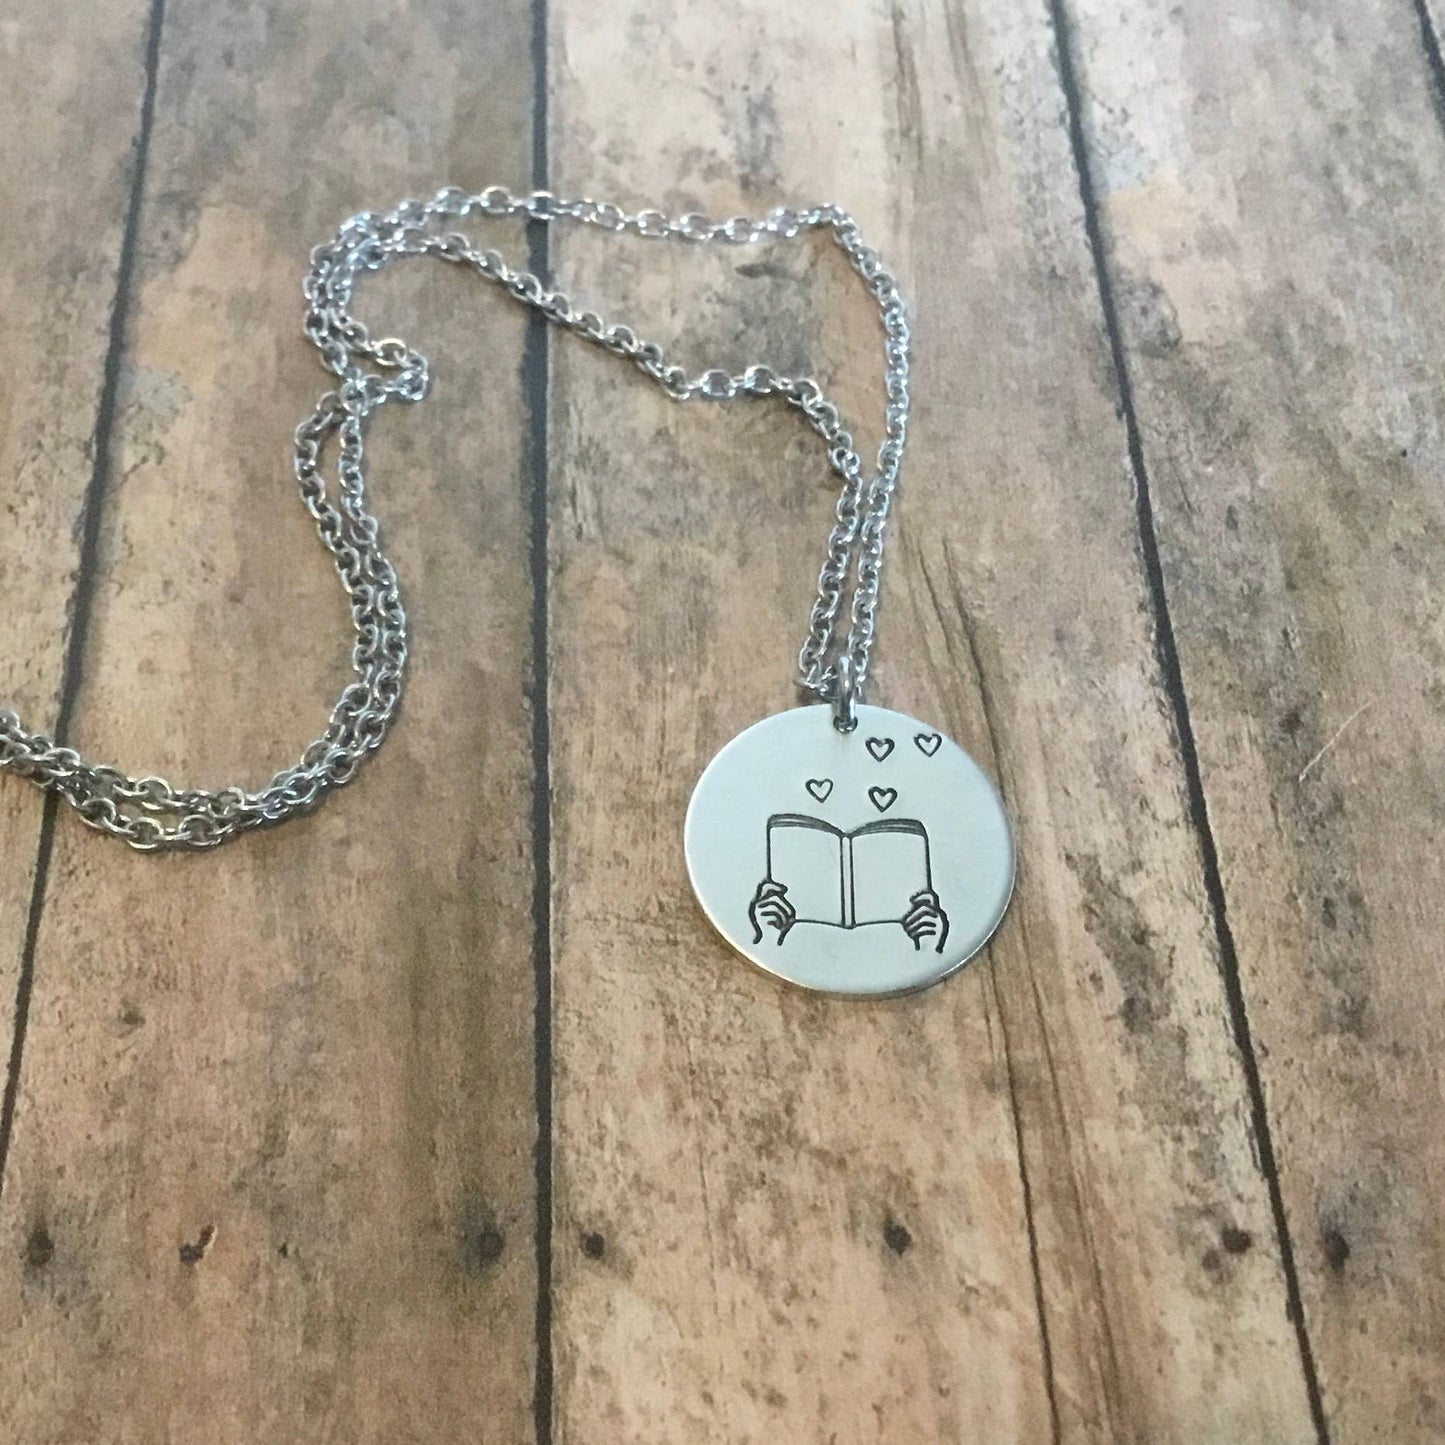 Book With Hearts Handemade Necklace | Circular Stamped Pendant Necklace in Silver